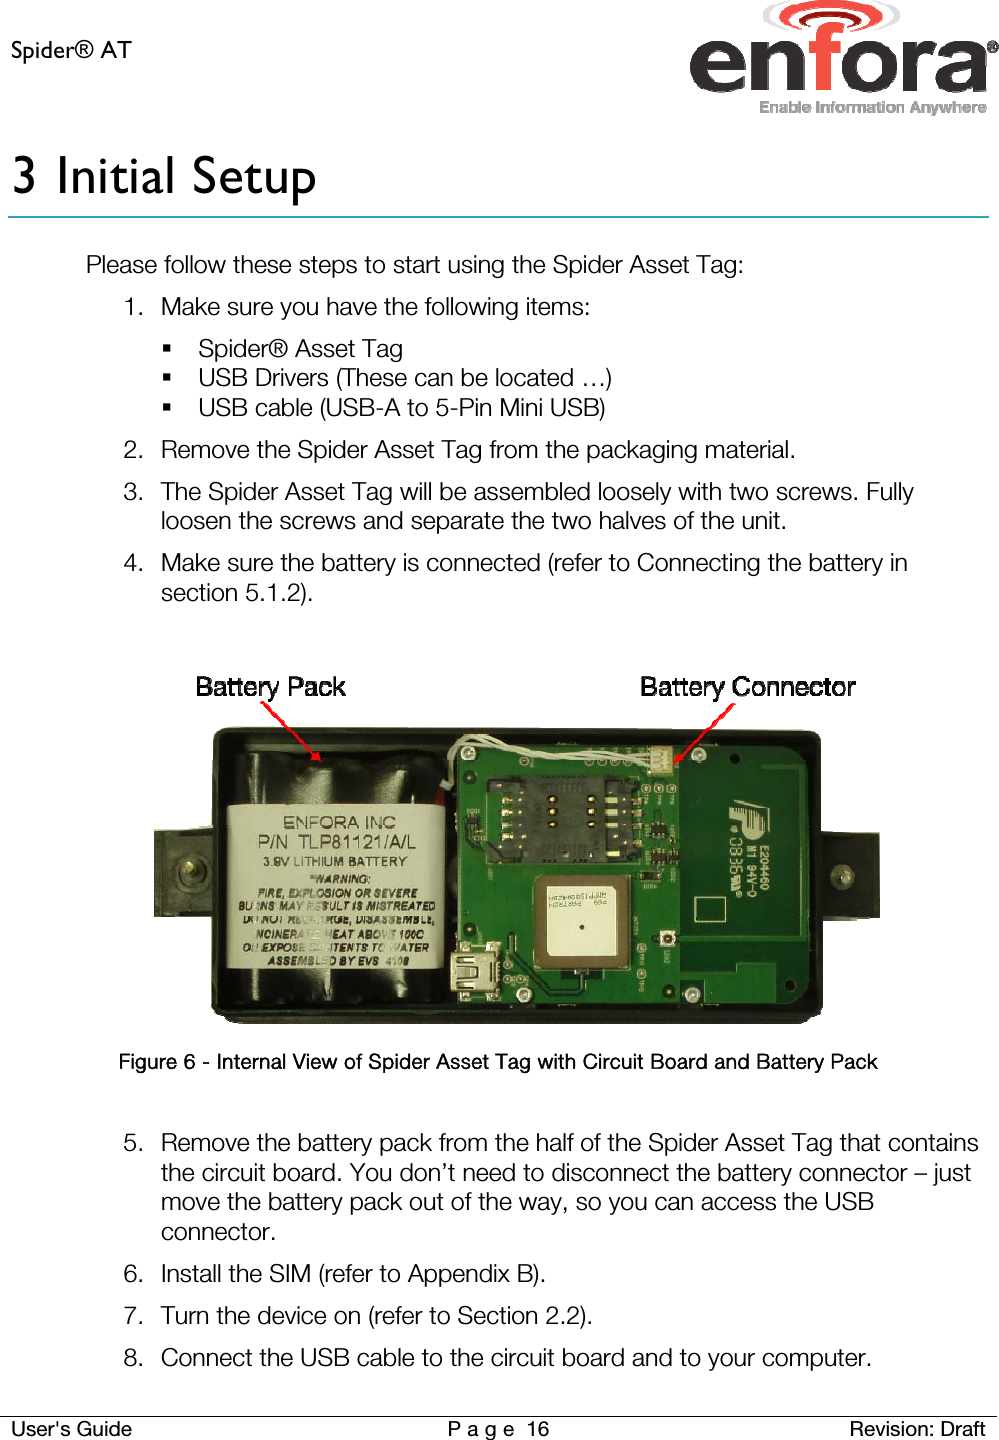 Spider® AT     User&apos;s Guide  P a g e 16 Revision: Draft 3 Initial Setup Please follow these steps to start using the Spider Asset Tag: 1. Make sure you have the following items:  Spider® Asset Tag  USB Drivers (These can be located …)  USB cable (USB-A to 5-Pin Mini USB) 2. Remove the Spider Asset Tag from the packaging material.  3. The Spider Asset Tag will be assembled loosely with two screws. Fully loosen the screws and separate the two halves of the unit. 4. Make sure the battery is connected (refer to Connecting the battery in section 5.1.2).    Figure 6 - Internal View of Spider Asset Tag with Circuit Board and Battery Pack  5. Remove the battery pack from the half of the Spider Asset Tag that contains the circuit board. You don’t need to disconnect the battery connector – just move the battery pack out of the way, so you can access the USB connector. 6. Install the SIM (refer to Appendix B). 7. Turn the device on (refer to Section 2.2). 8. Connect the USB cable to the circuit board and to your computer. 